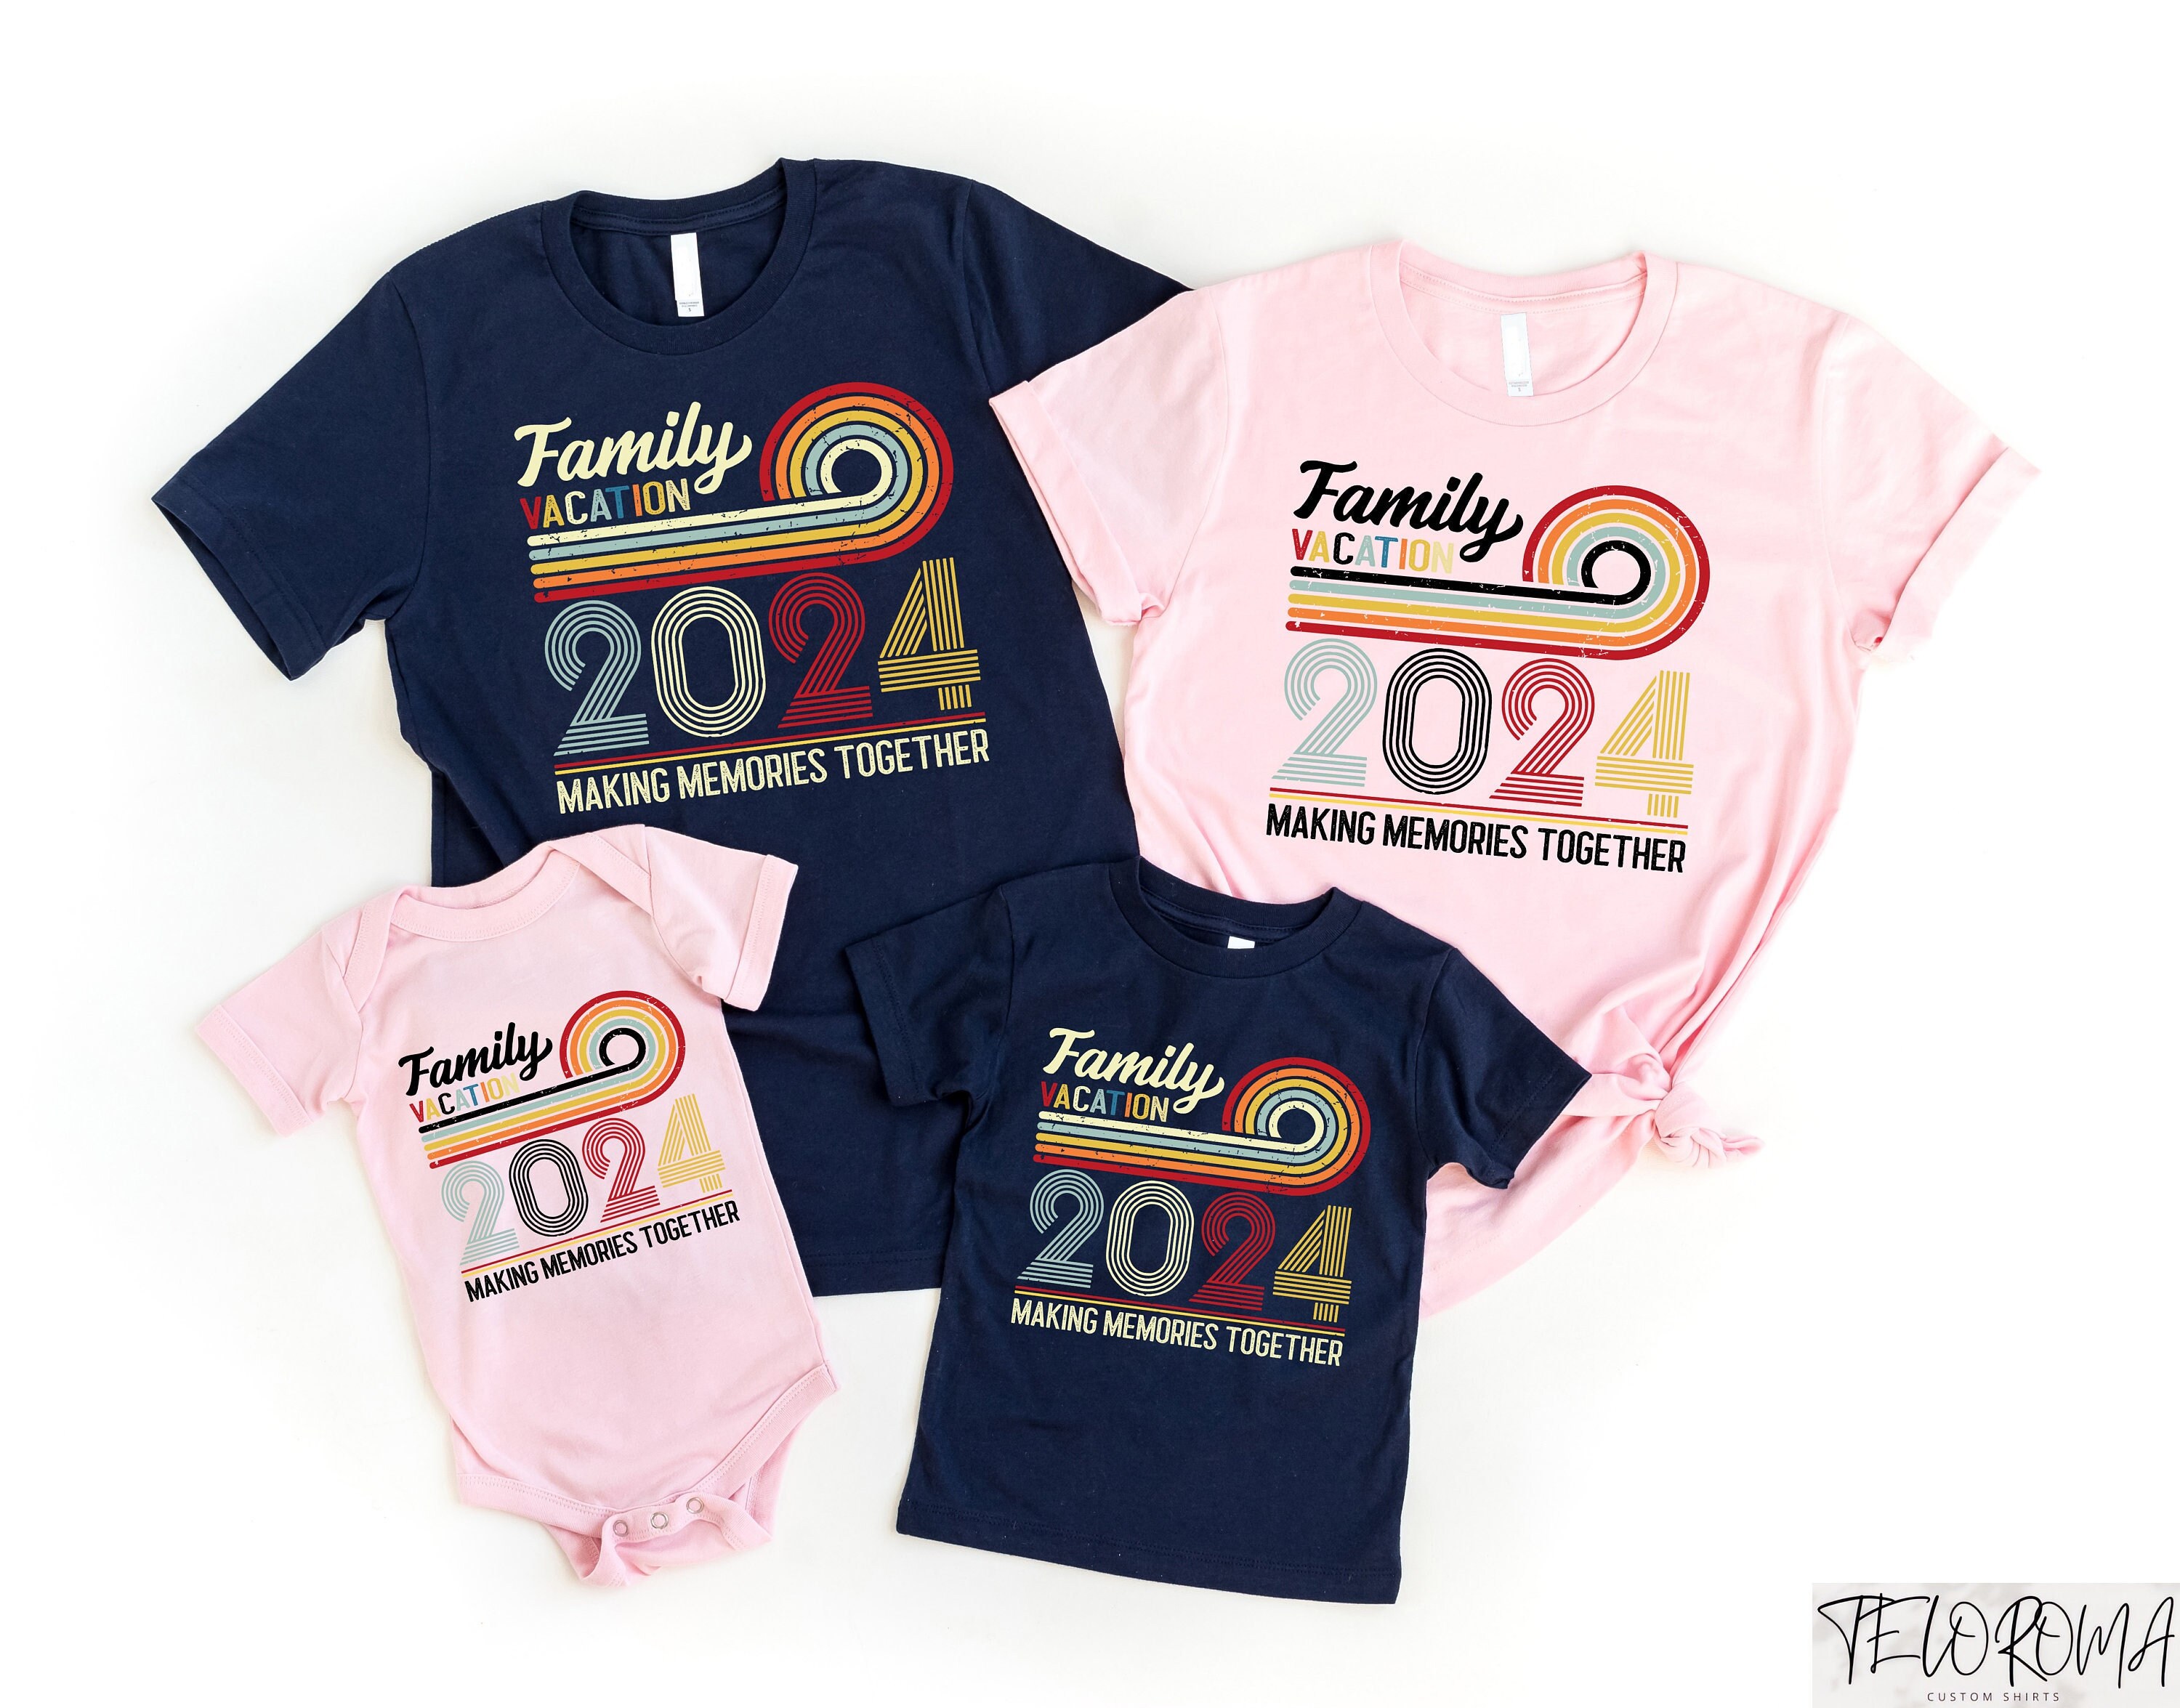 Discover Family Vacation 2024 Tshirt, Making Memories Together Shirt, Family Cruise Shirt, Family Beach Trip Shirt, Summer Family Vacation Tshirts